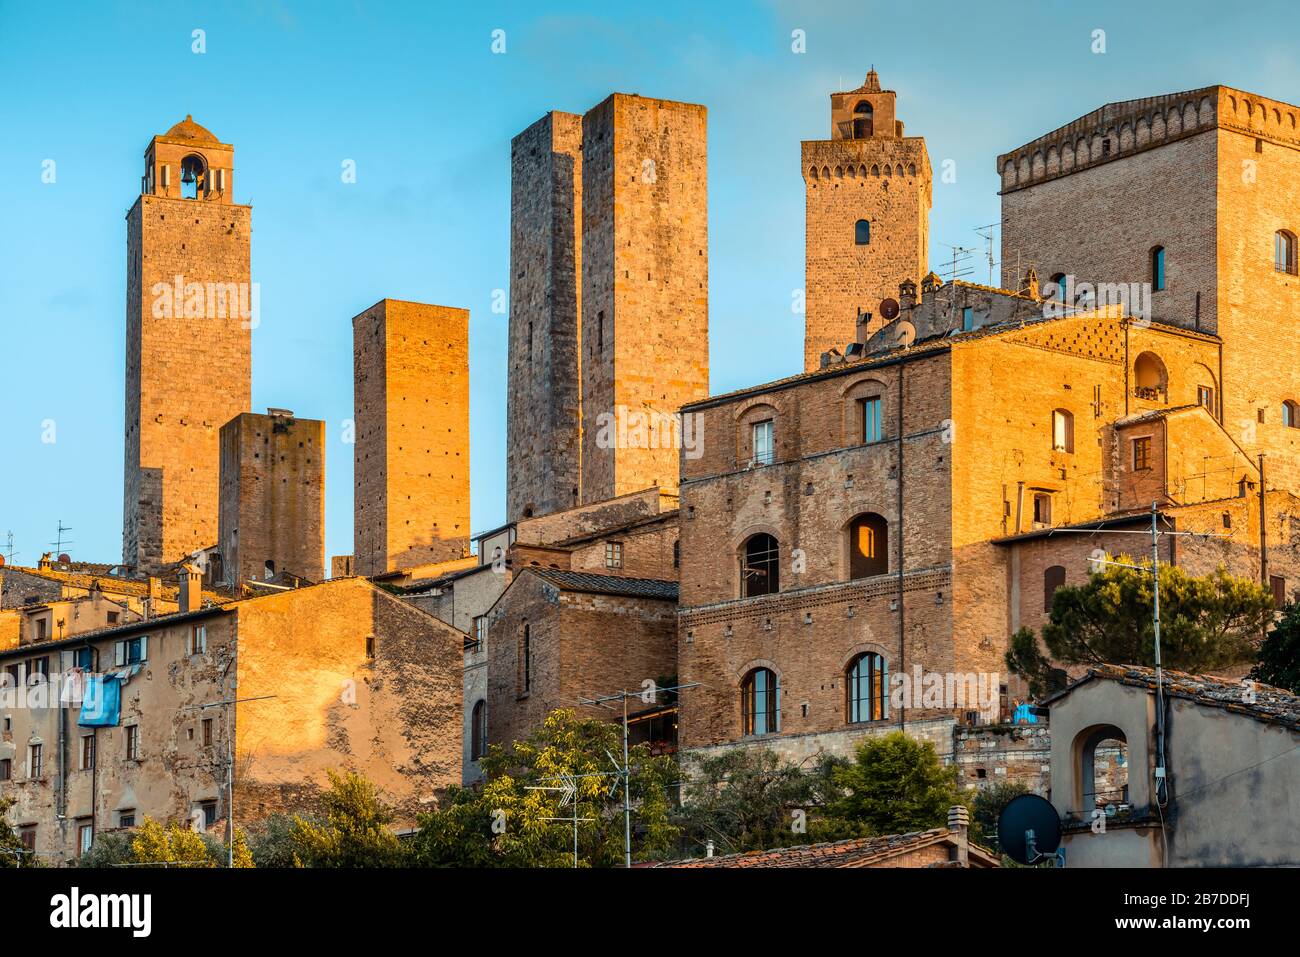 Medieval Towers Of San Gimignano Tuscany Italy Unesco World Heritage Site Dominating The